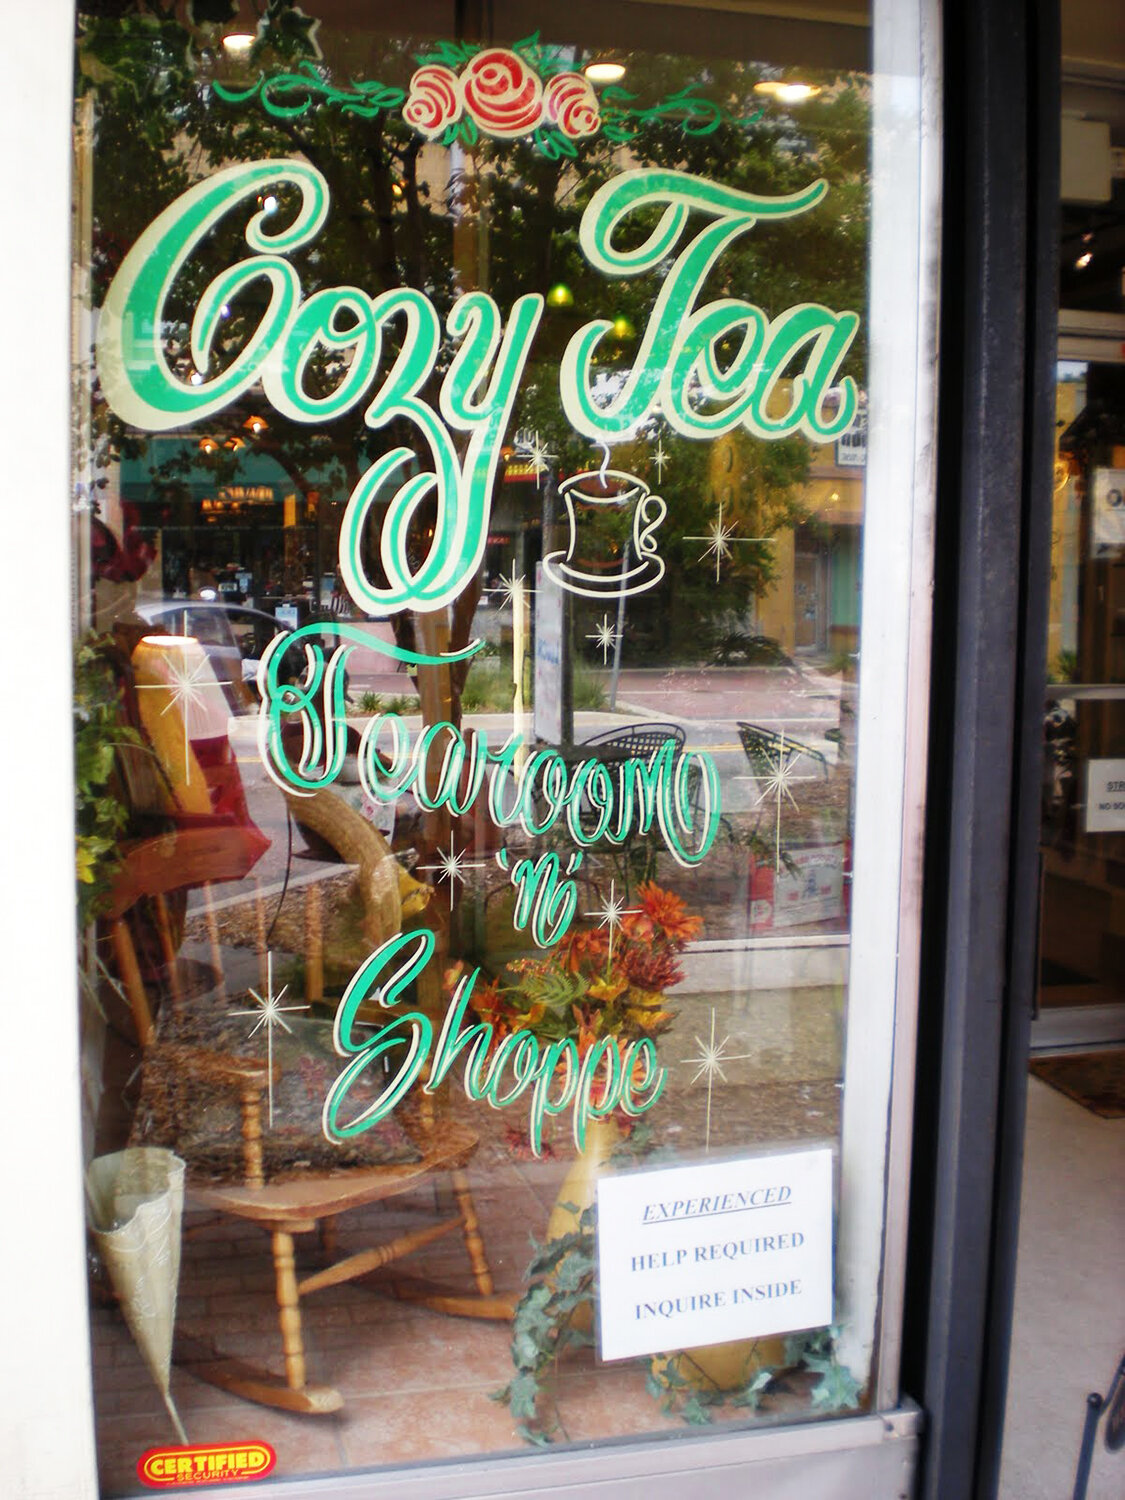  Cozy Tea's very first window sign painted by our good friend T.J, thank you T.J.! 